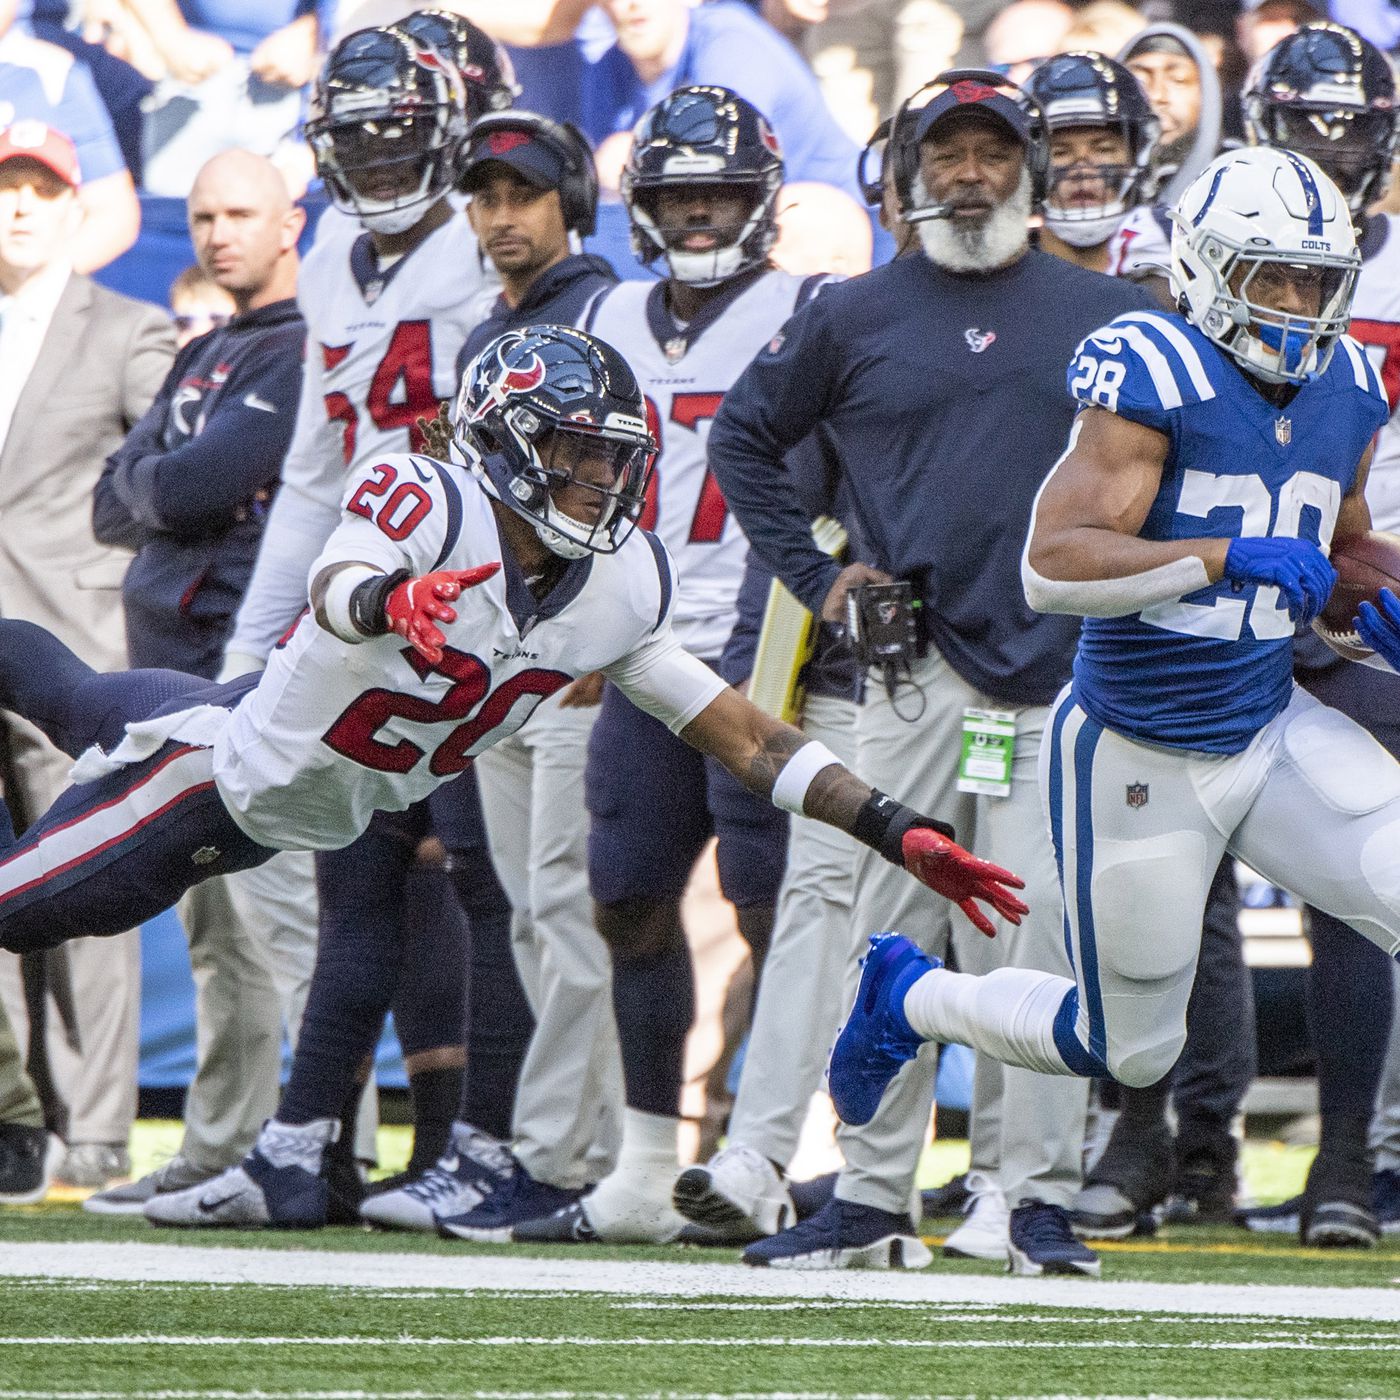 Knee-jerk reactions: Colts defeat Texans at home 31-3 - Stampede Blue